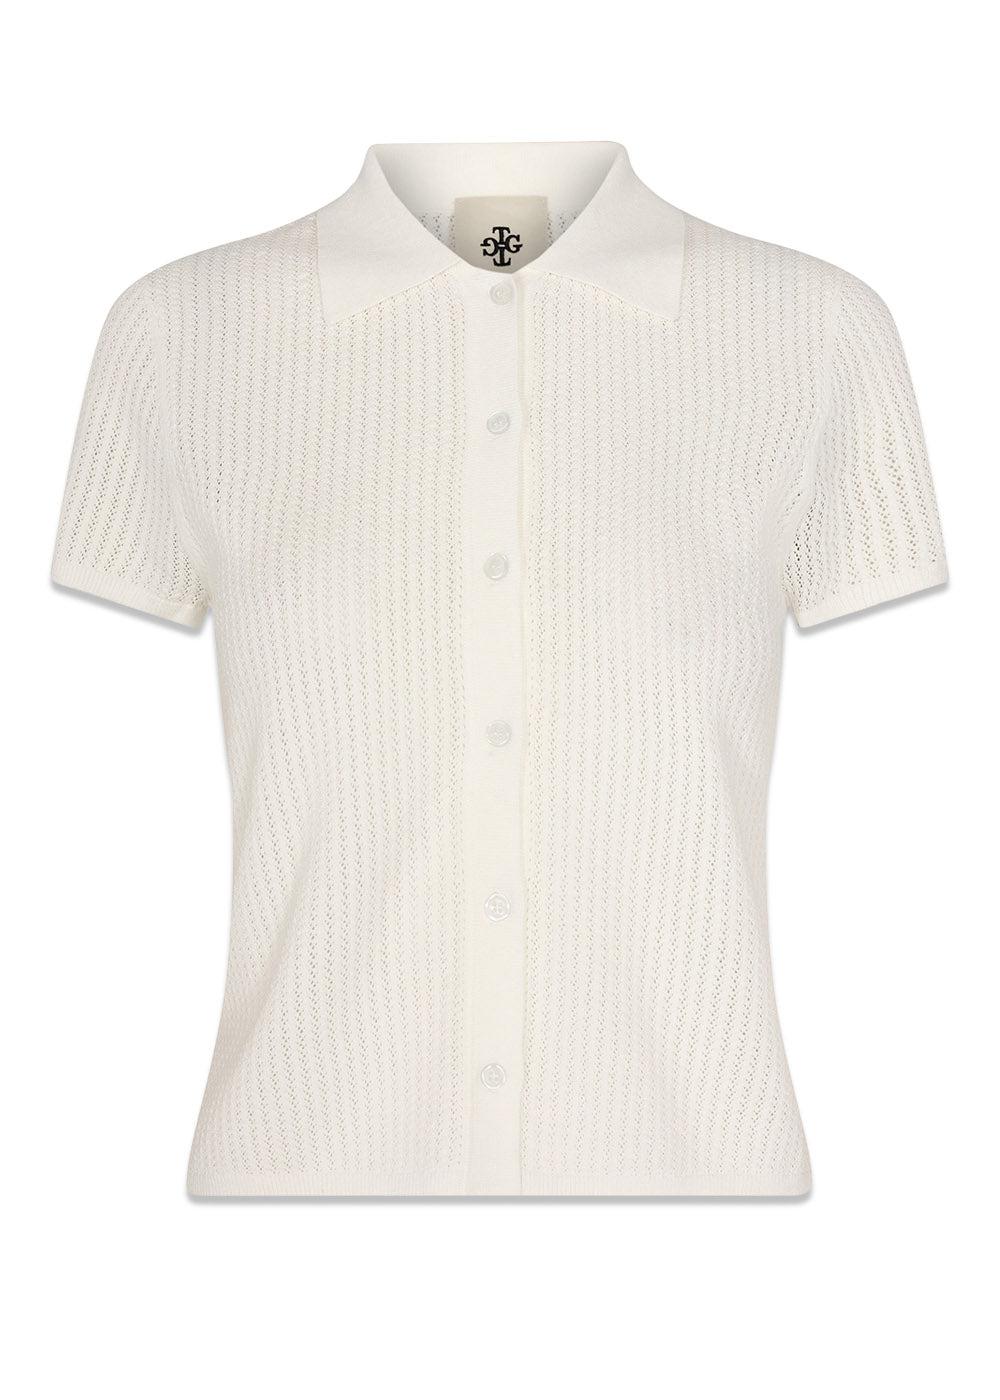 The Garments Marmont Polo - White. Køb blouses her.